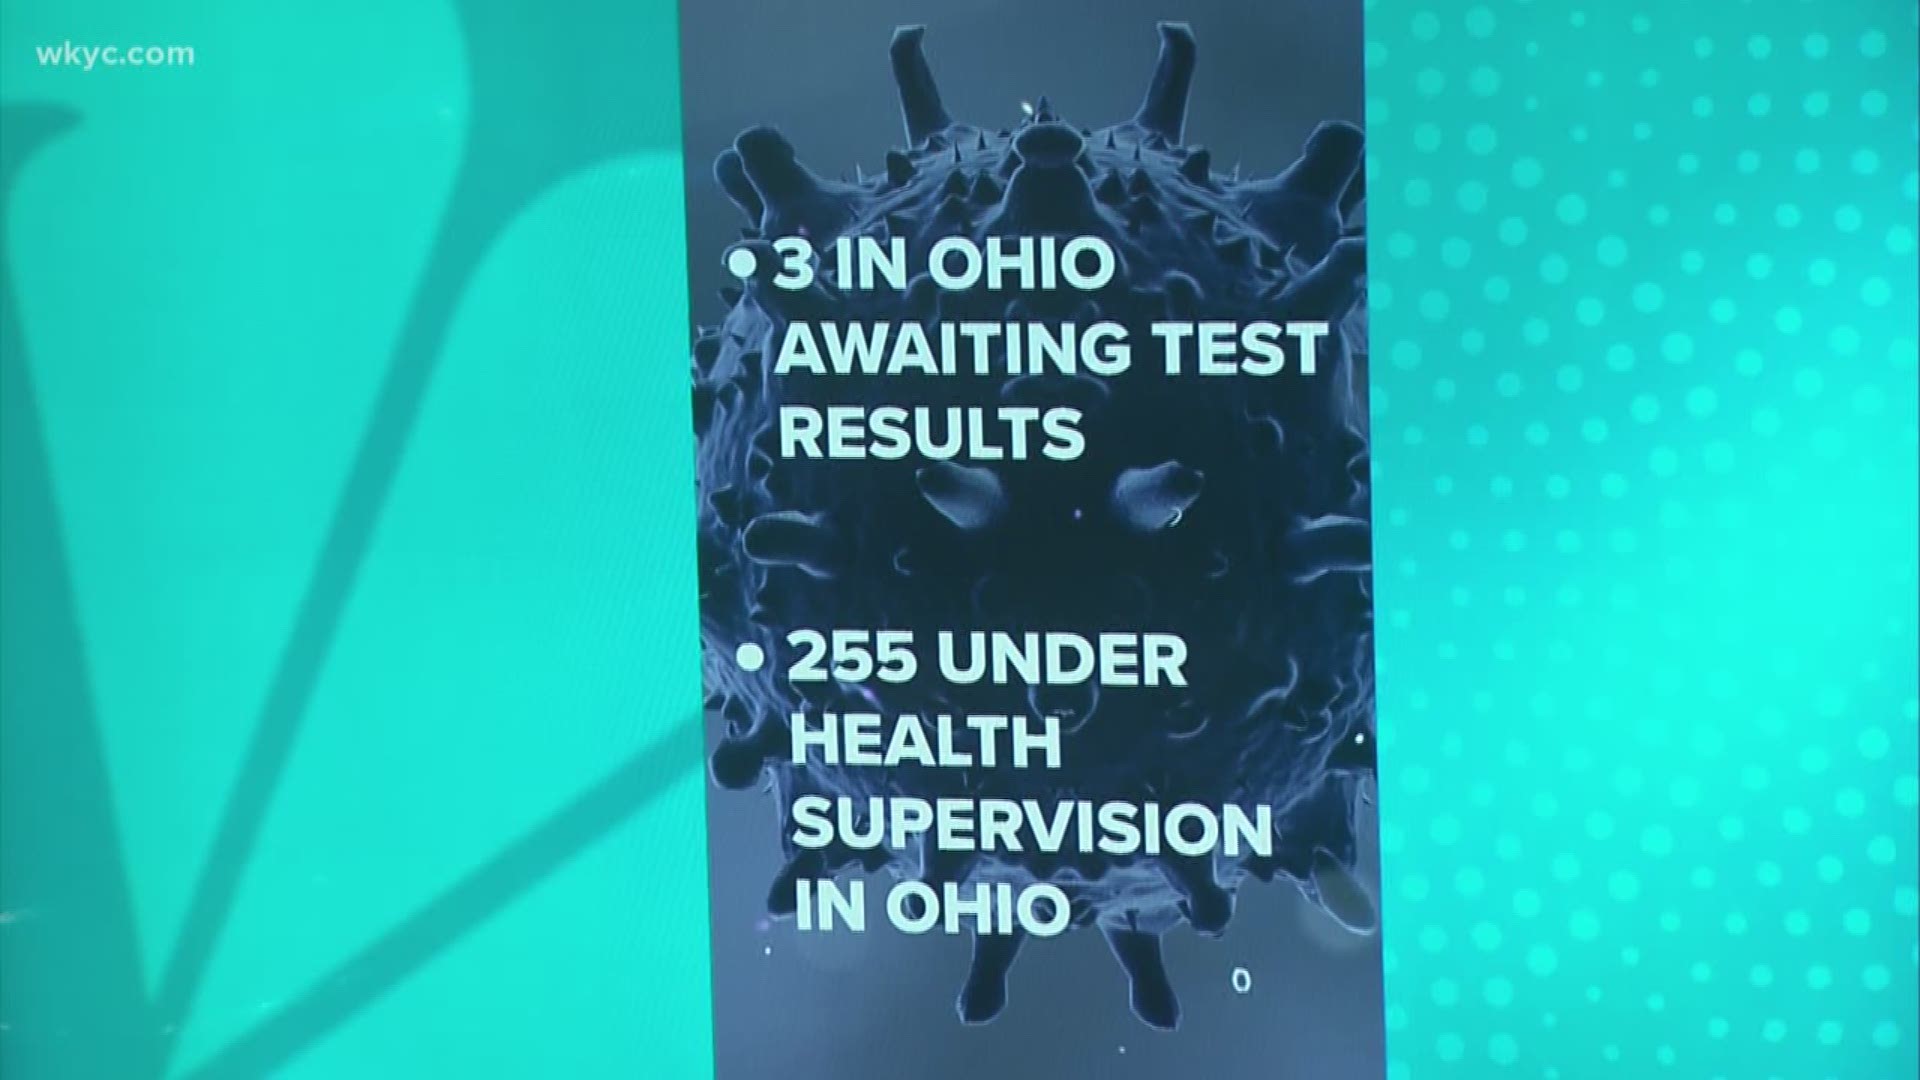 There are still no confirmed cases of coronavirus in Ohio. Three people are awaiting test results.